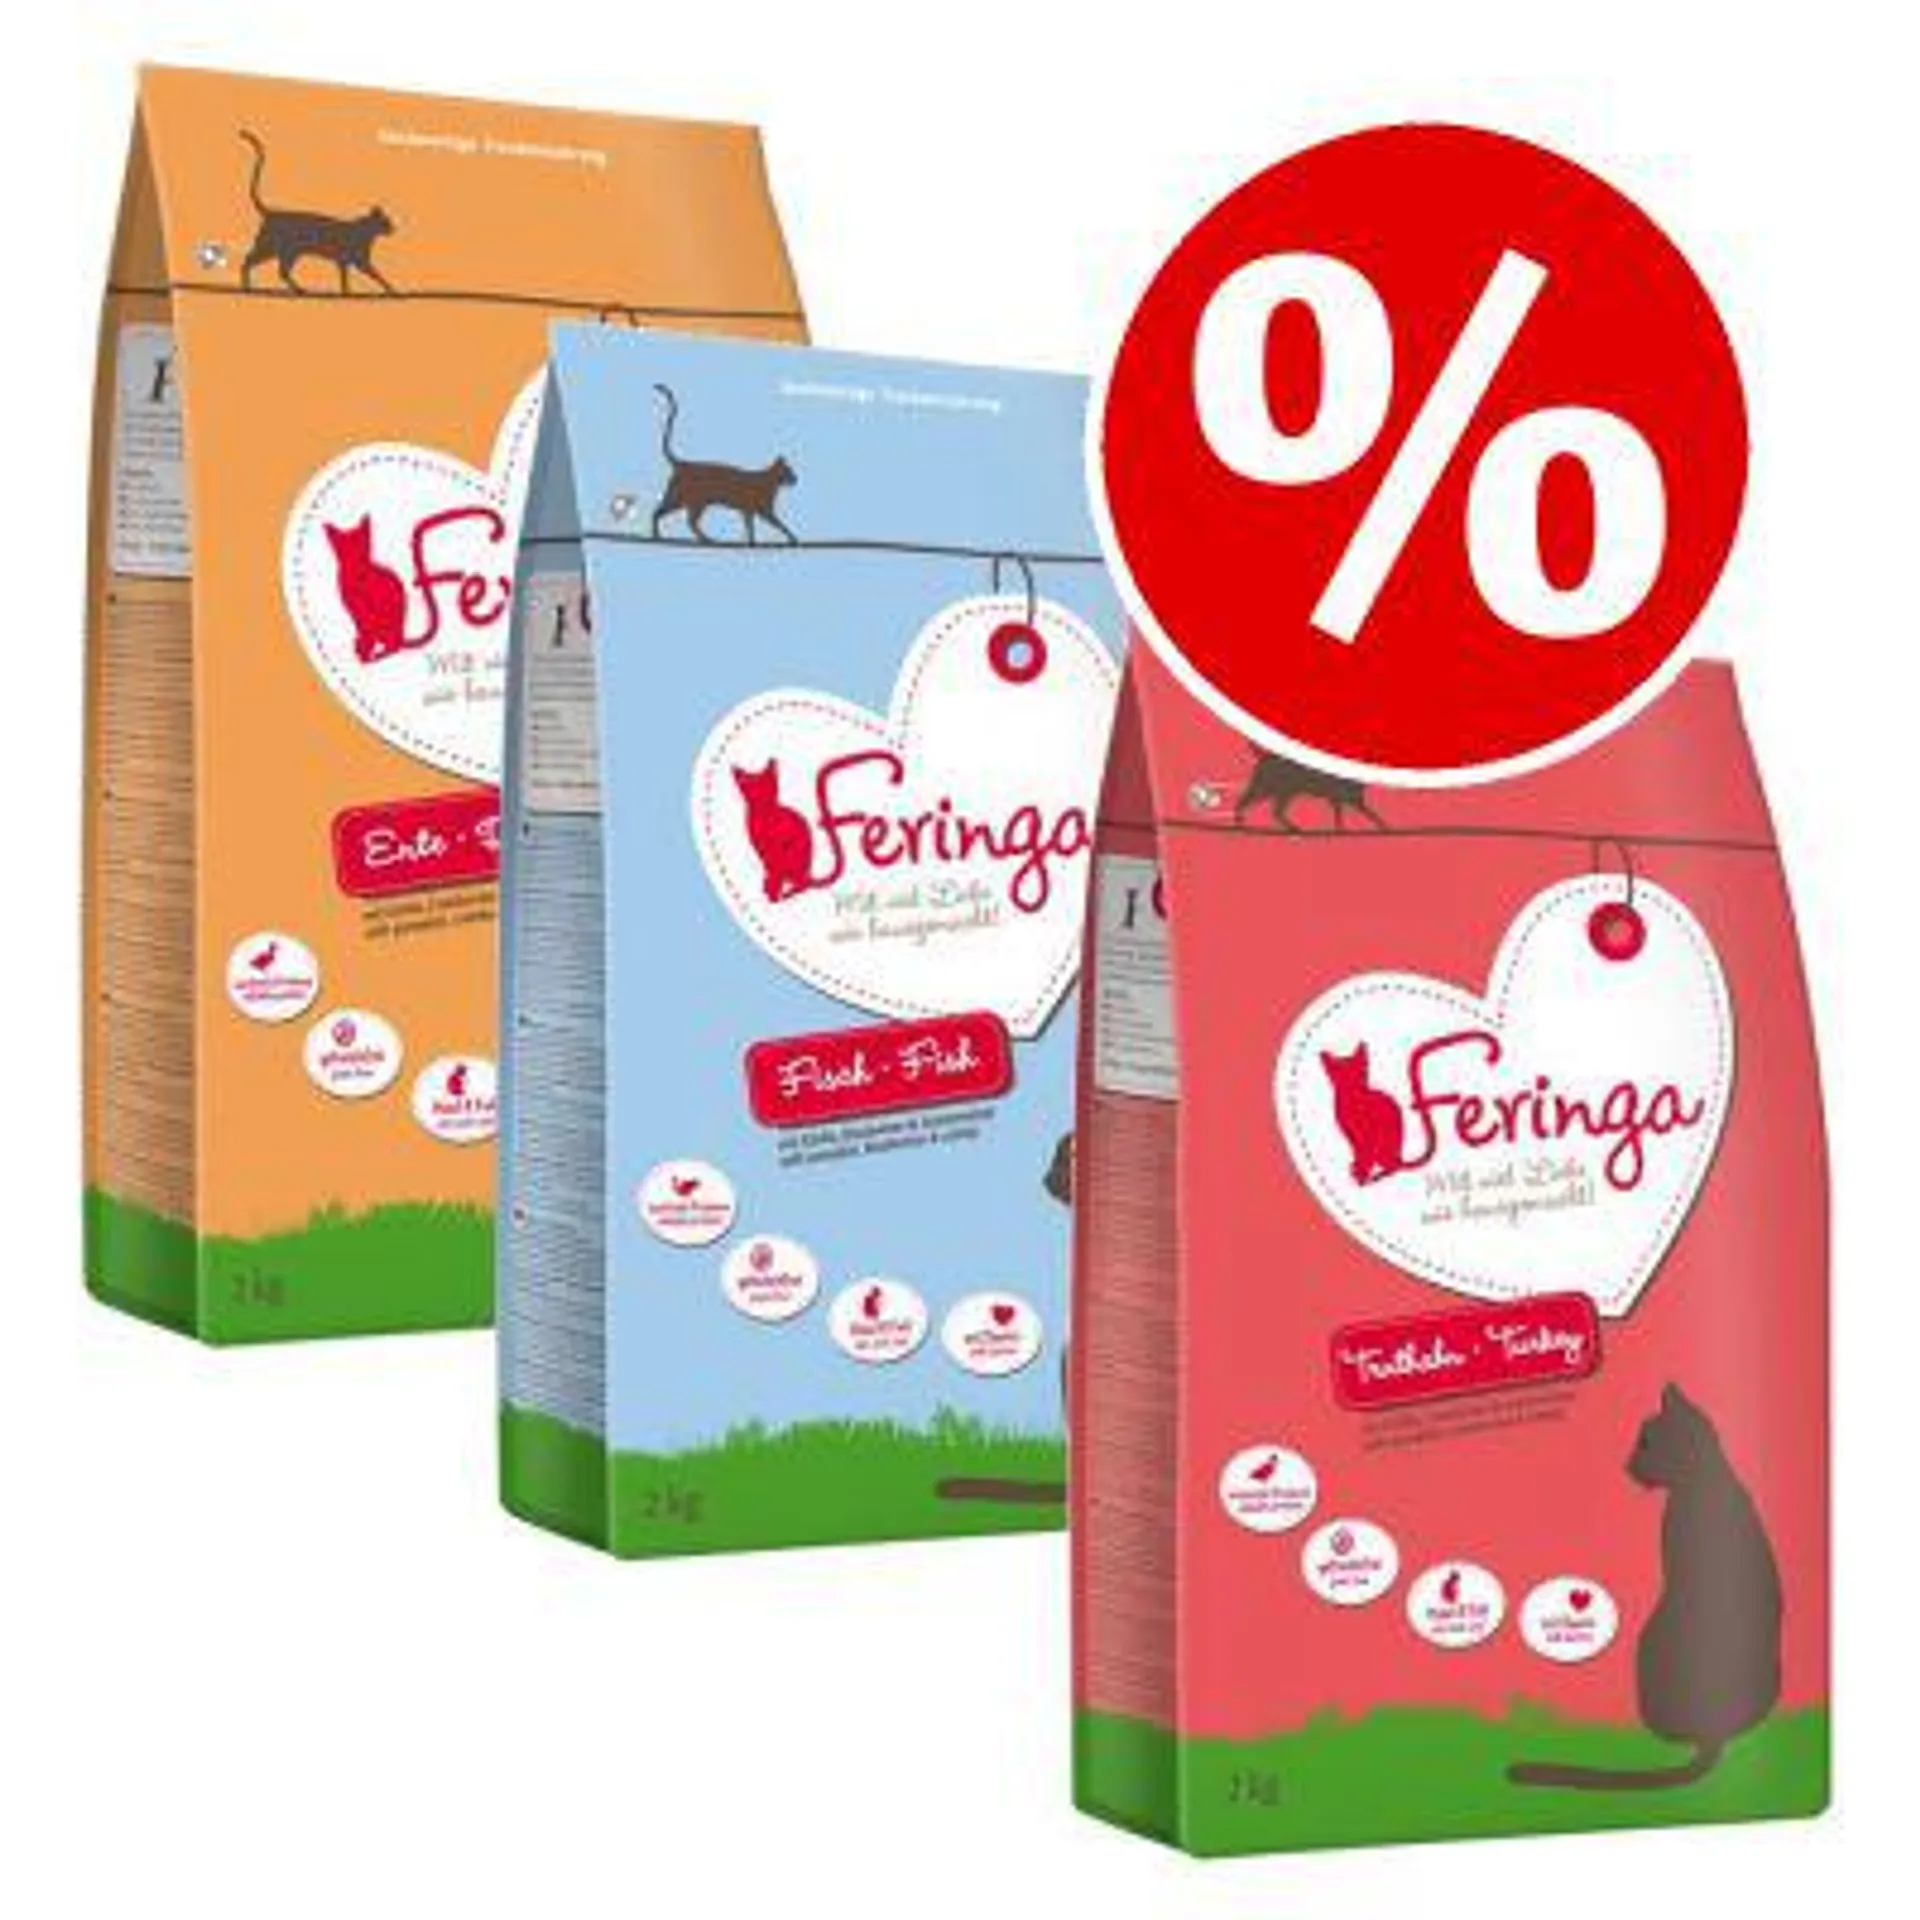 3 x 400g Feringa Mixed Trial Packs Dry Cat Food - Special Price!*